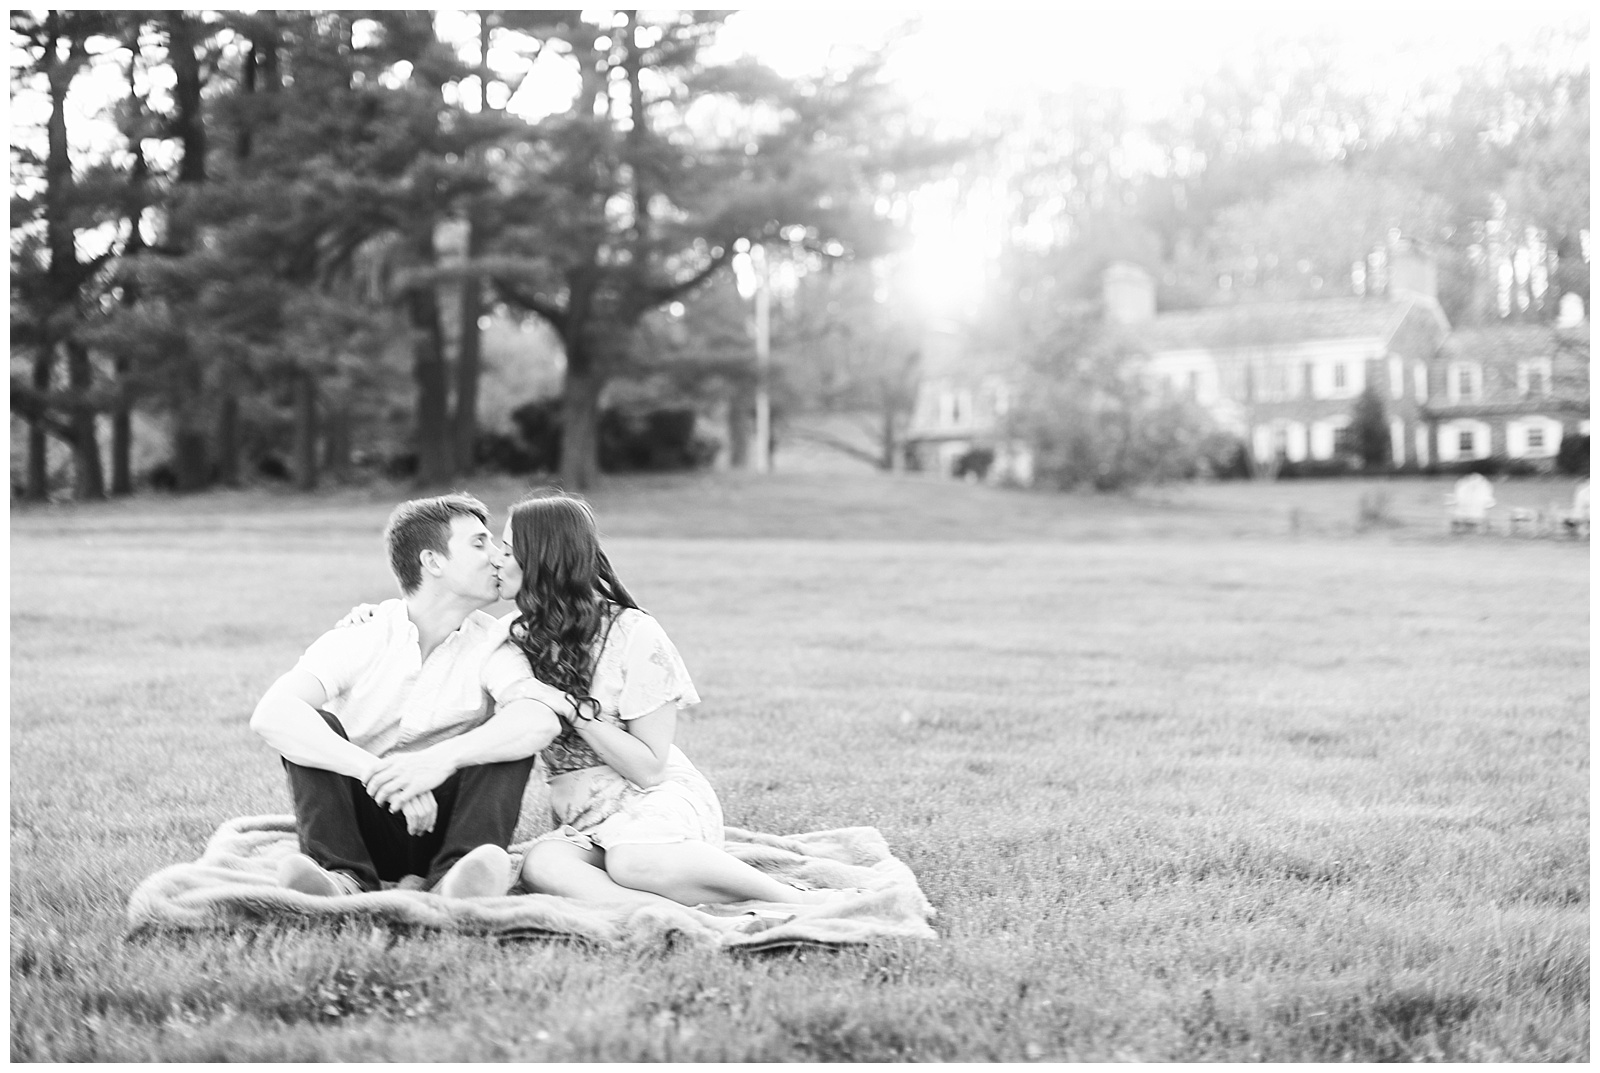 baltimore, wedding, photographer, baltimore wedding photographer, engagement session, baltimore engagement, maryland wedding photographer, romantic, forest, farm, farm engagement, forest engagement ,engaged, natural light, golden hour, spring, fall, candid, outdoors, travel, rustic, nature, love, cute, happy, meadow, maryland engagement photographer, maryland, couple, in love